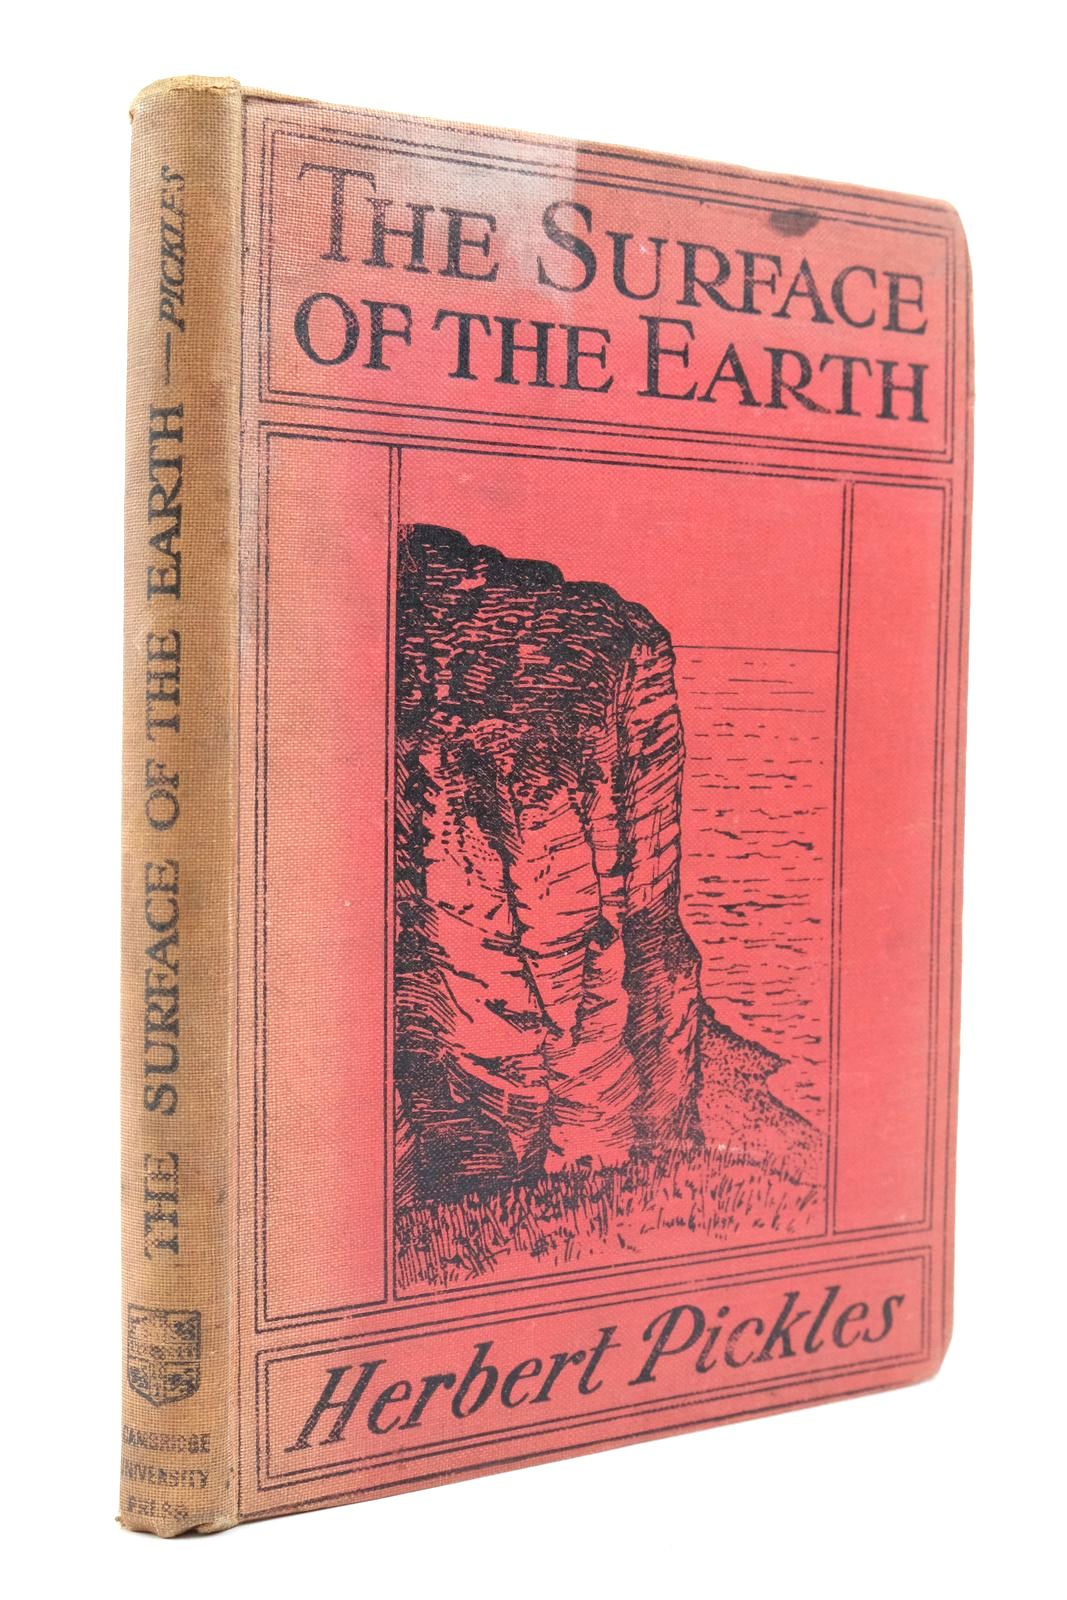 Photo of THE SURFACE OF THE EARTH: ELEMENTARY, PHYSICAL AND ECONOMIC GEOGRAPHY written by Pickles, Herbert published by Cambridge University Press (STOCK CODE: 2139062)  for sale by Stella & Rose's Books